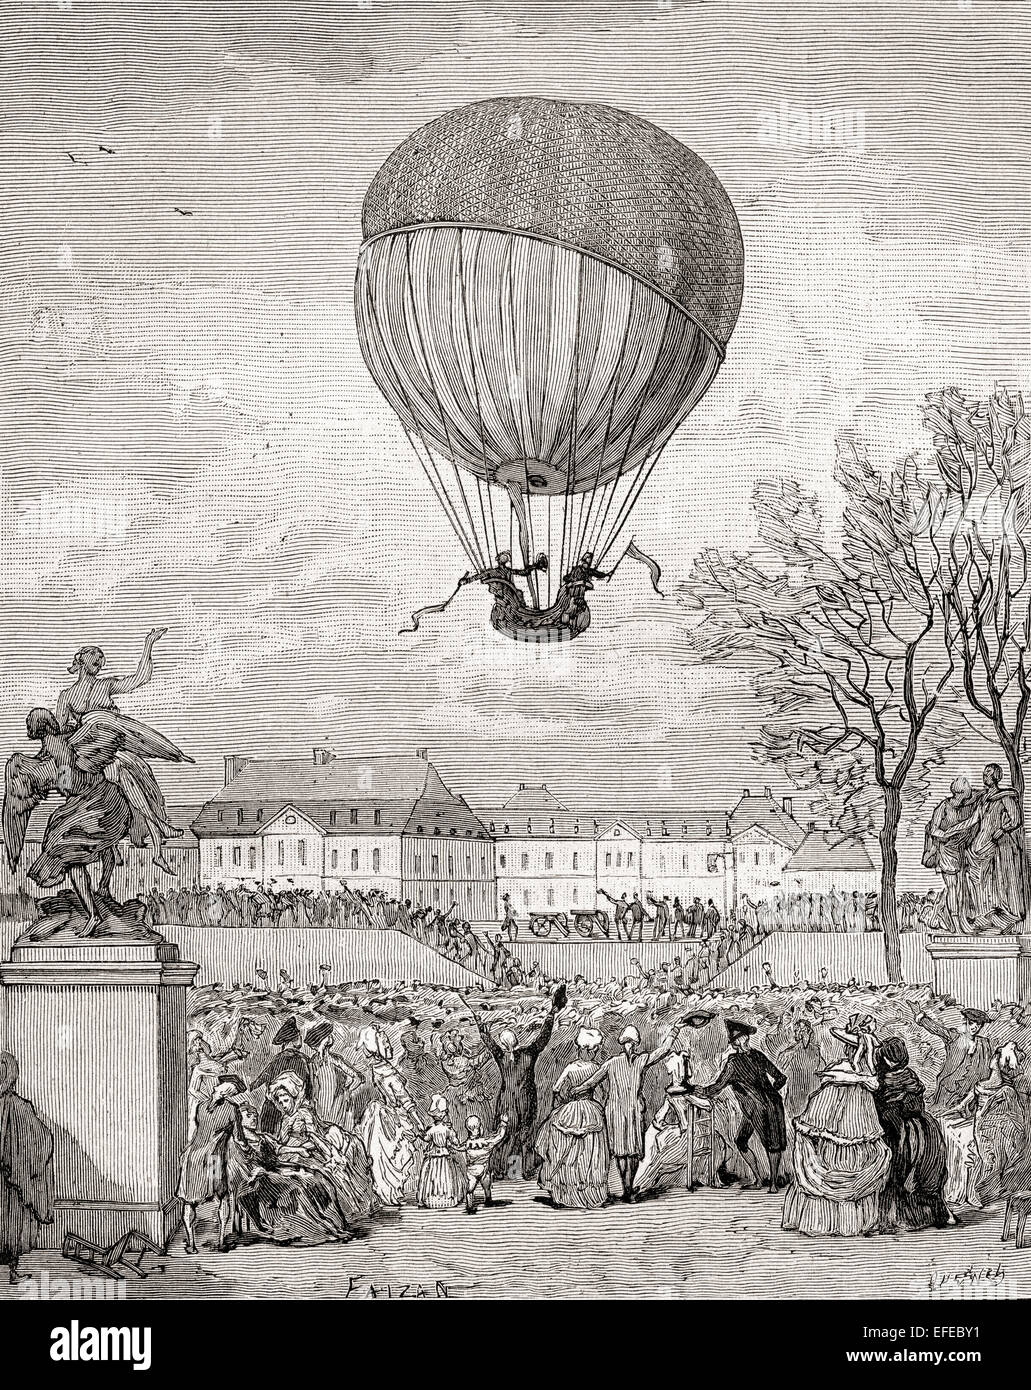 Professor Jacques Charles and Nicolas-Louis Robert fly the world's first manned hydrogen balloon on 1 December 1783 at the Tuilleries Gardens, Paris, France. Stock Photo